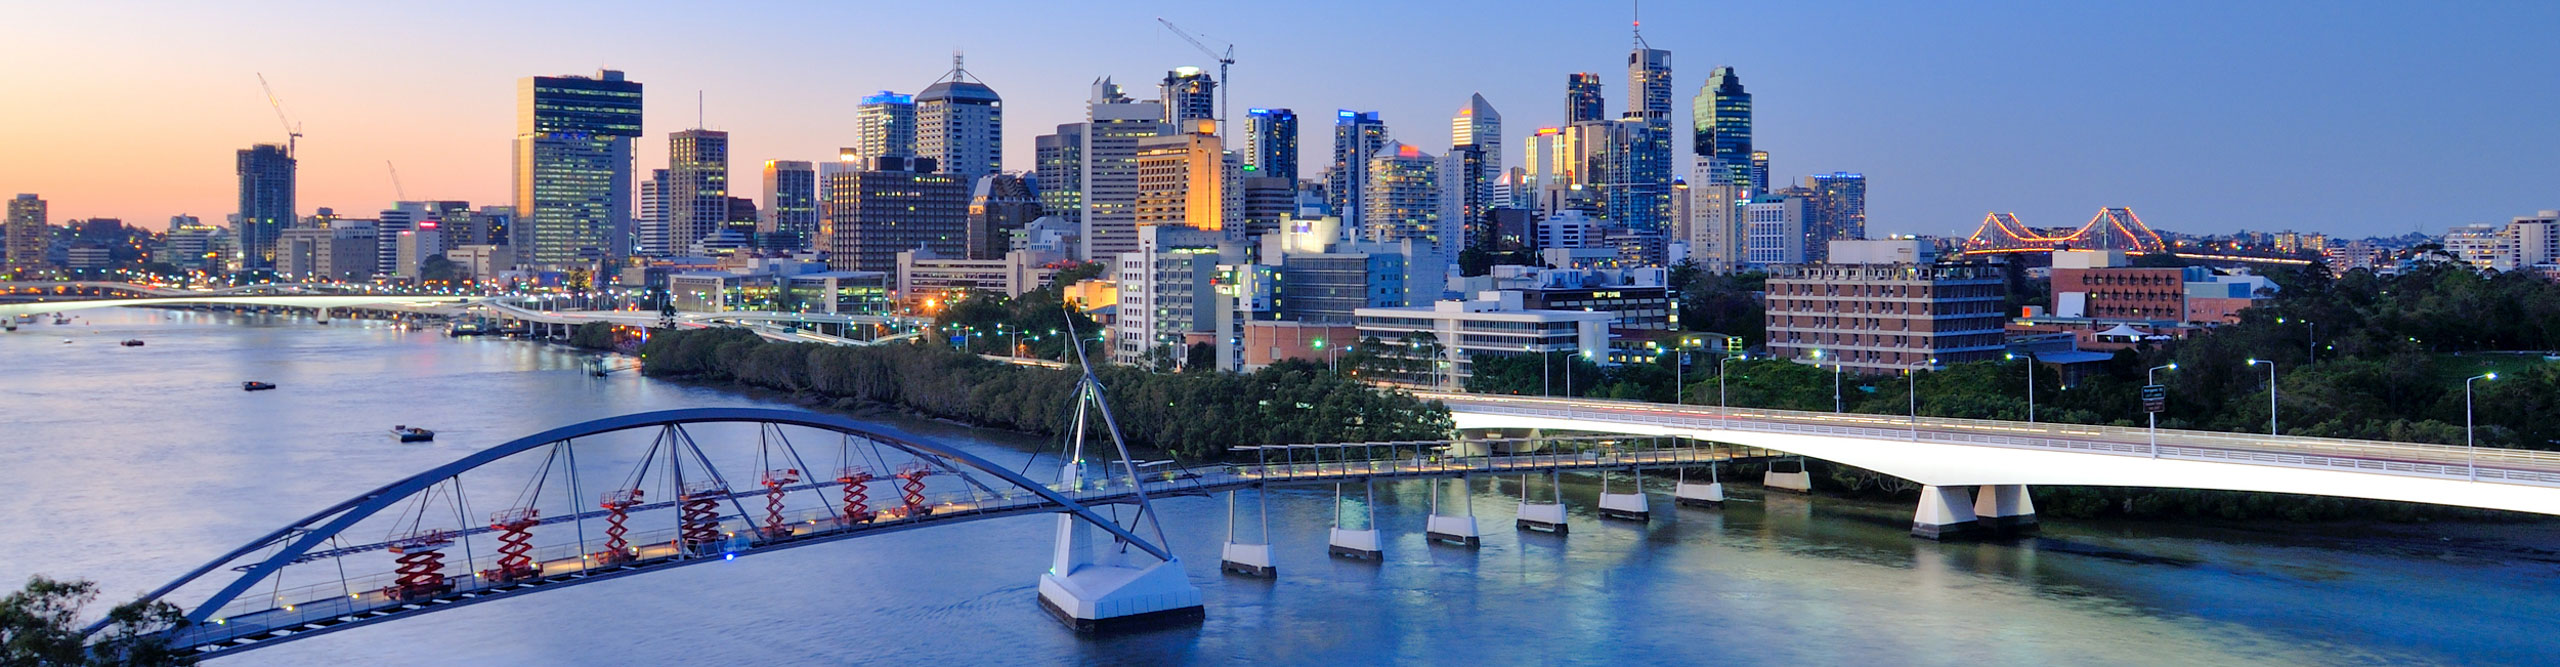 Brisbane city skyline and Brisbane river viewing from Kangaroo Point, Queensland at sunset